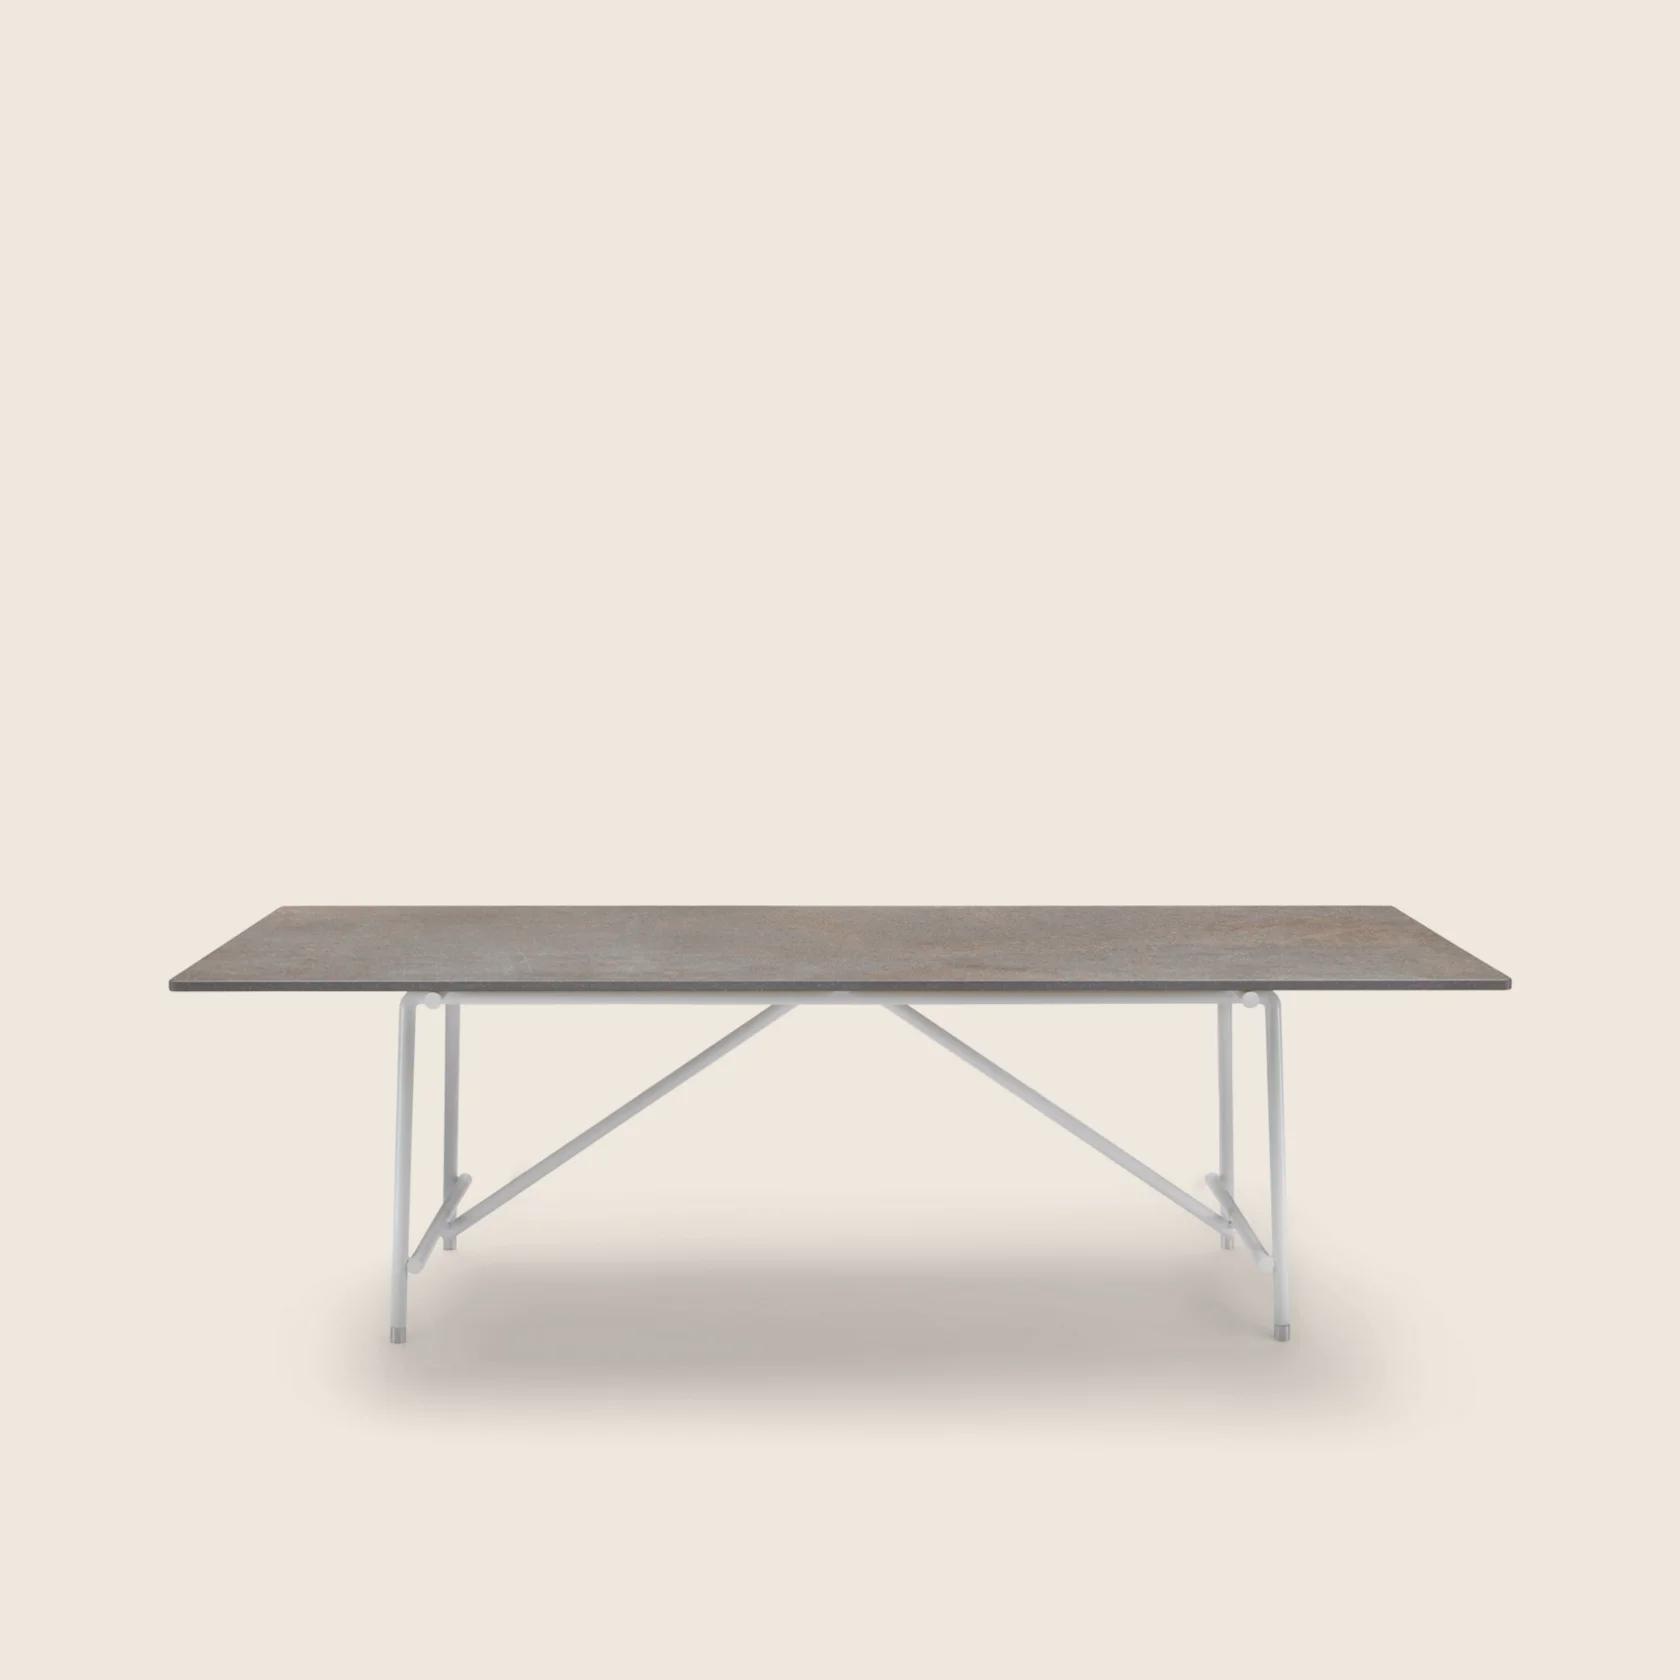 0282L0_ANY DAY OUTDOOR_TABLE_02.png